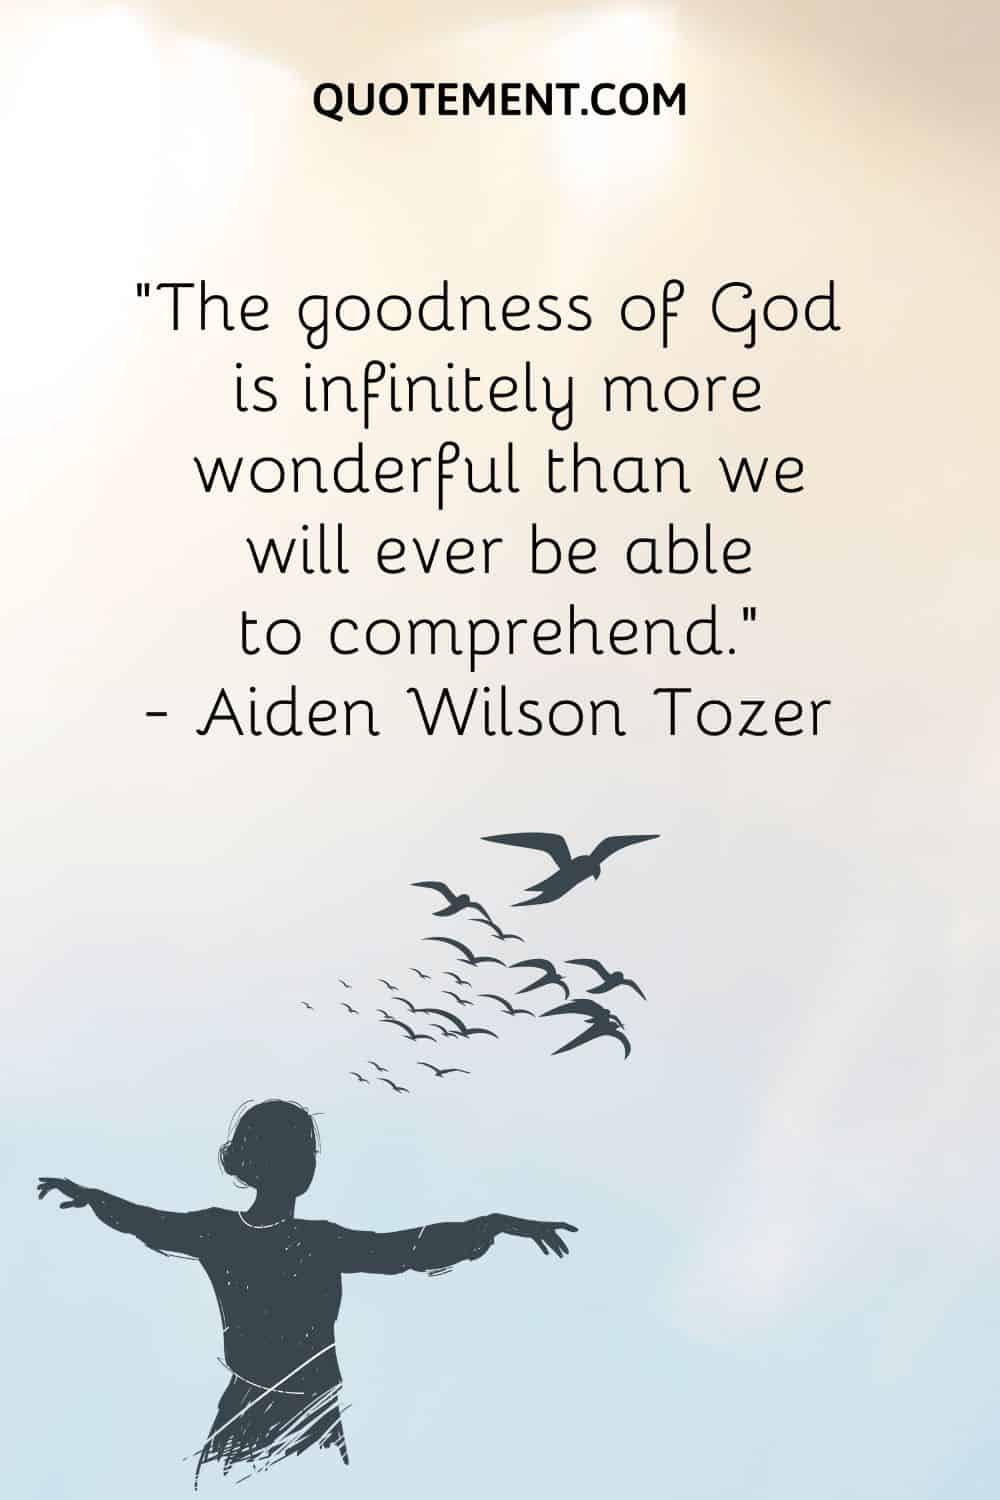 “The goodness of God is infinitely more wonderful than we will ever be able to comprehend.” — Aiden Wilson Tozer